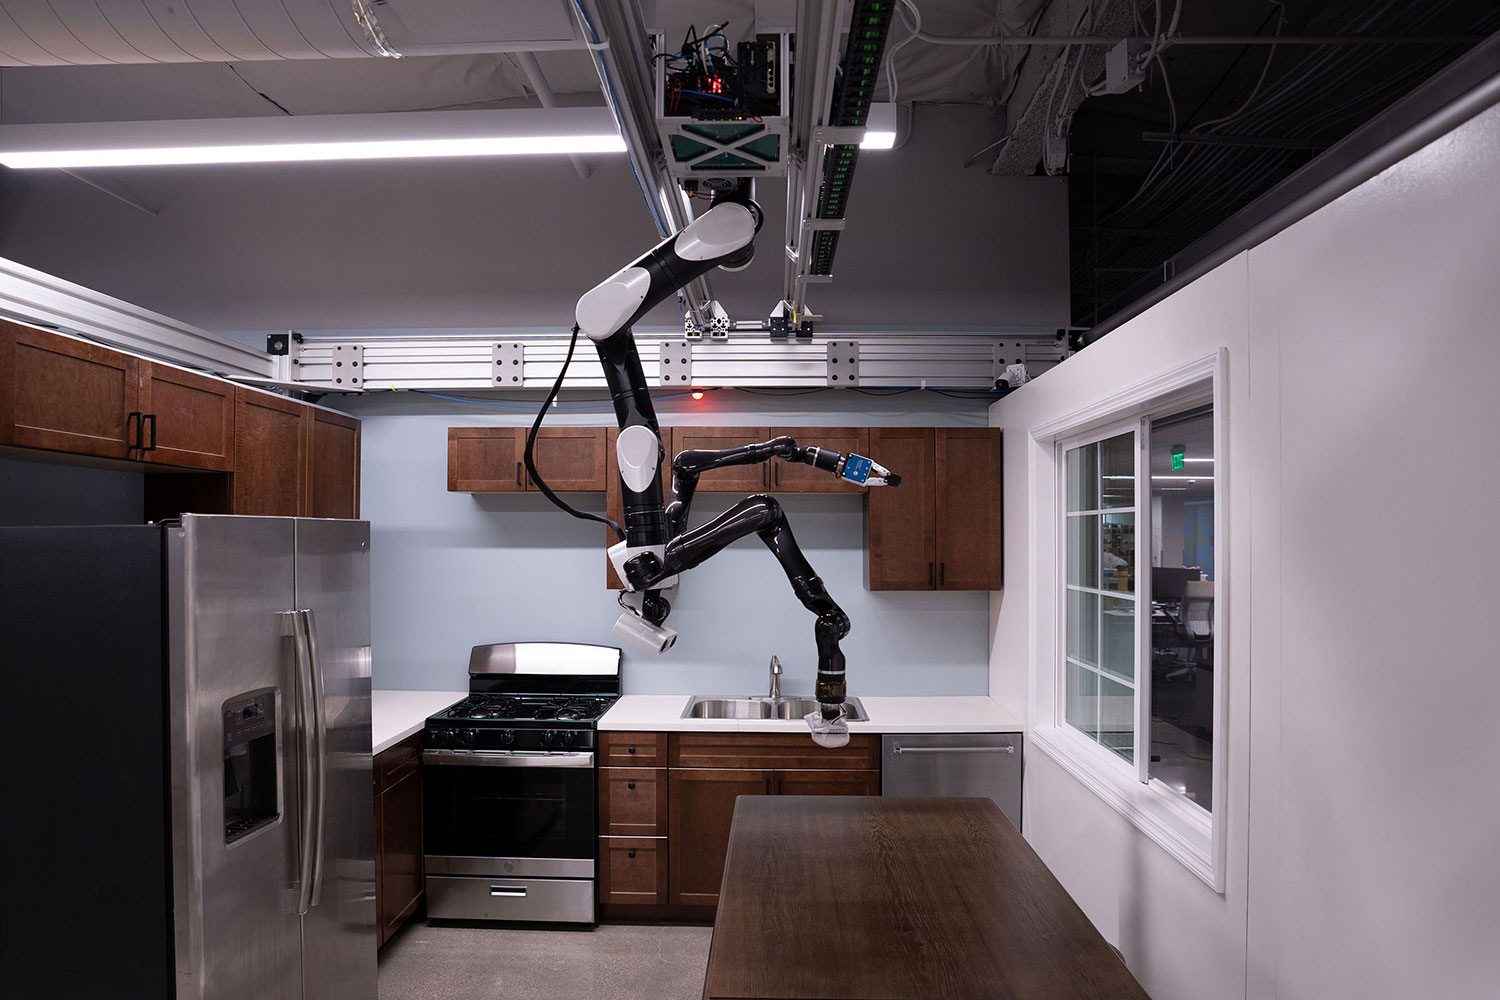 Toyota's Gantry robot hangs from the ceiling to perform household chores.